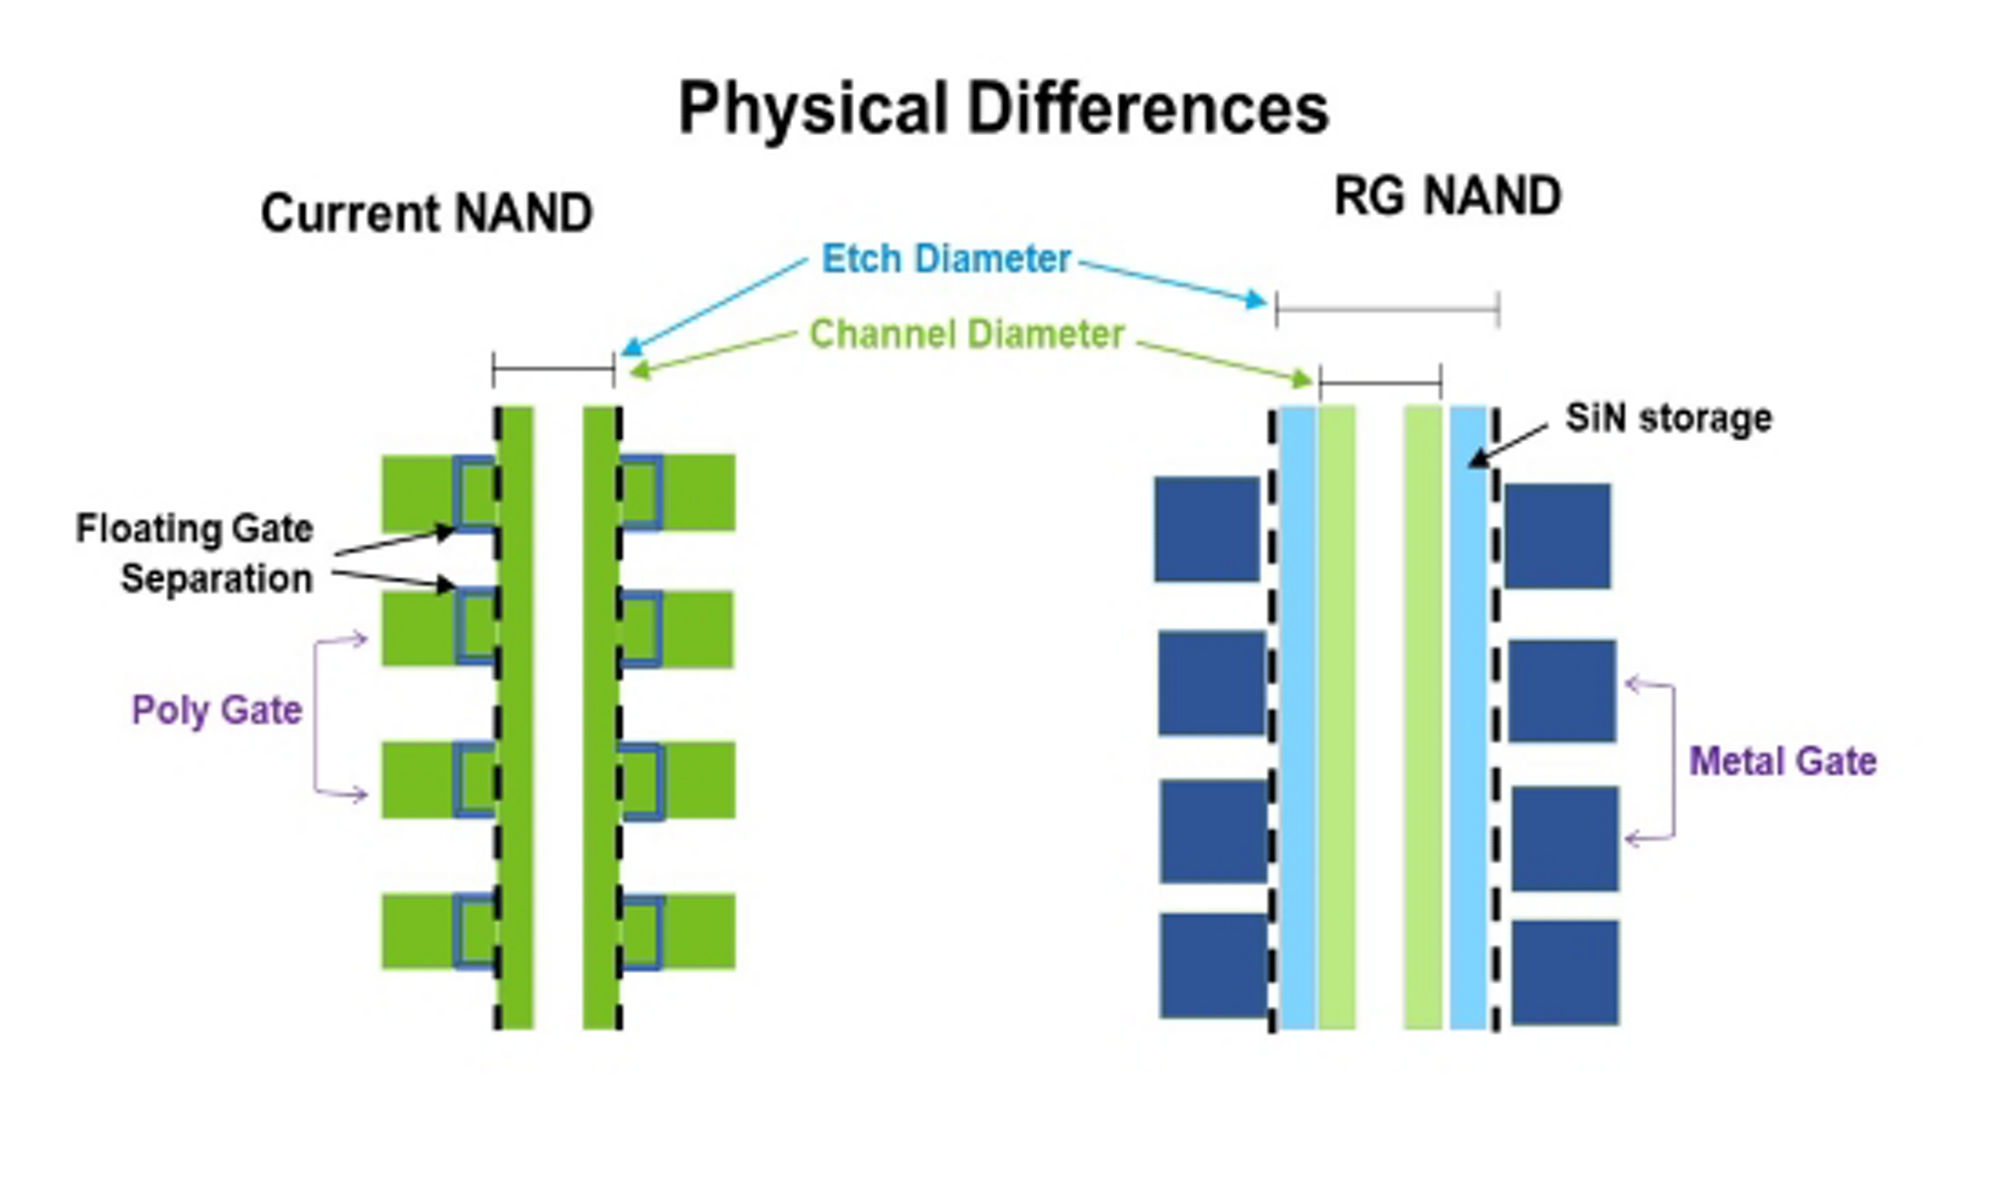 Physical differences between current NAND and RG NAND